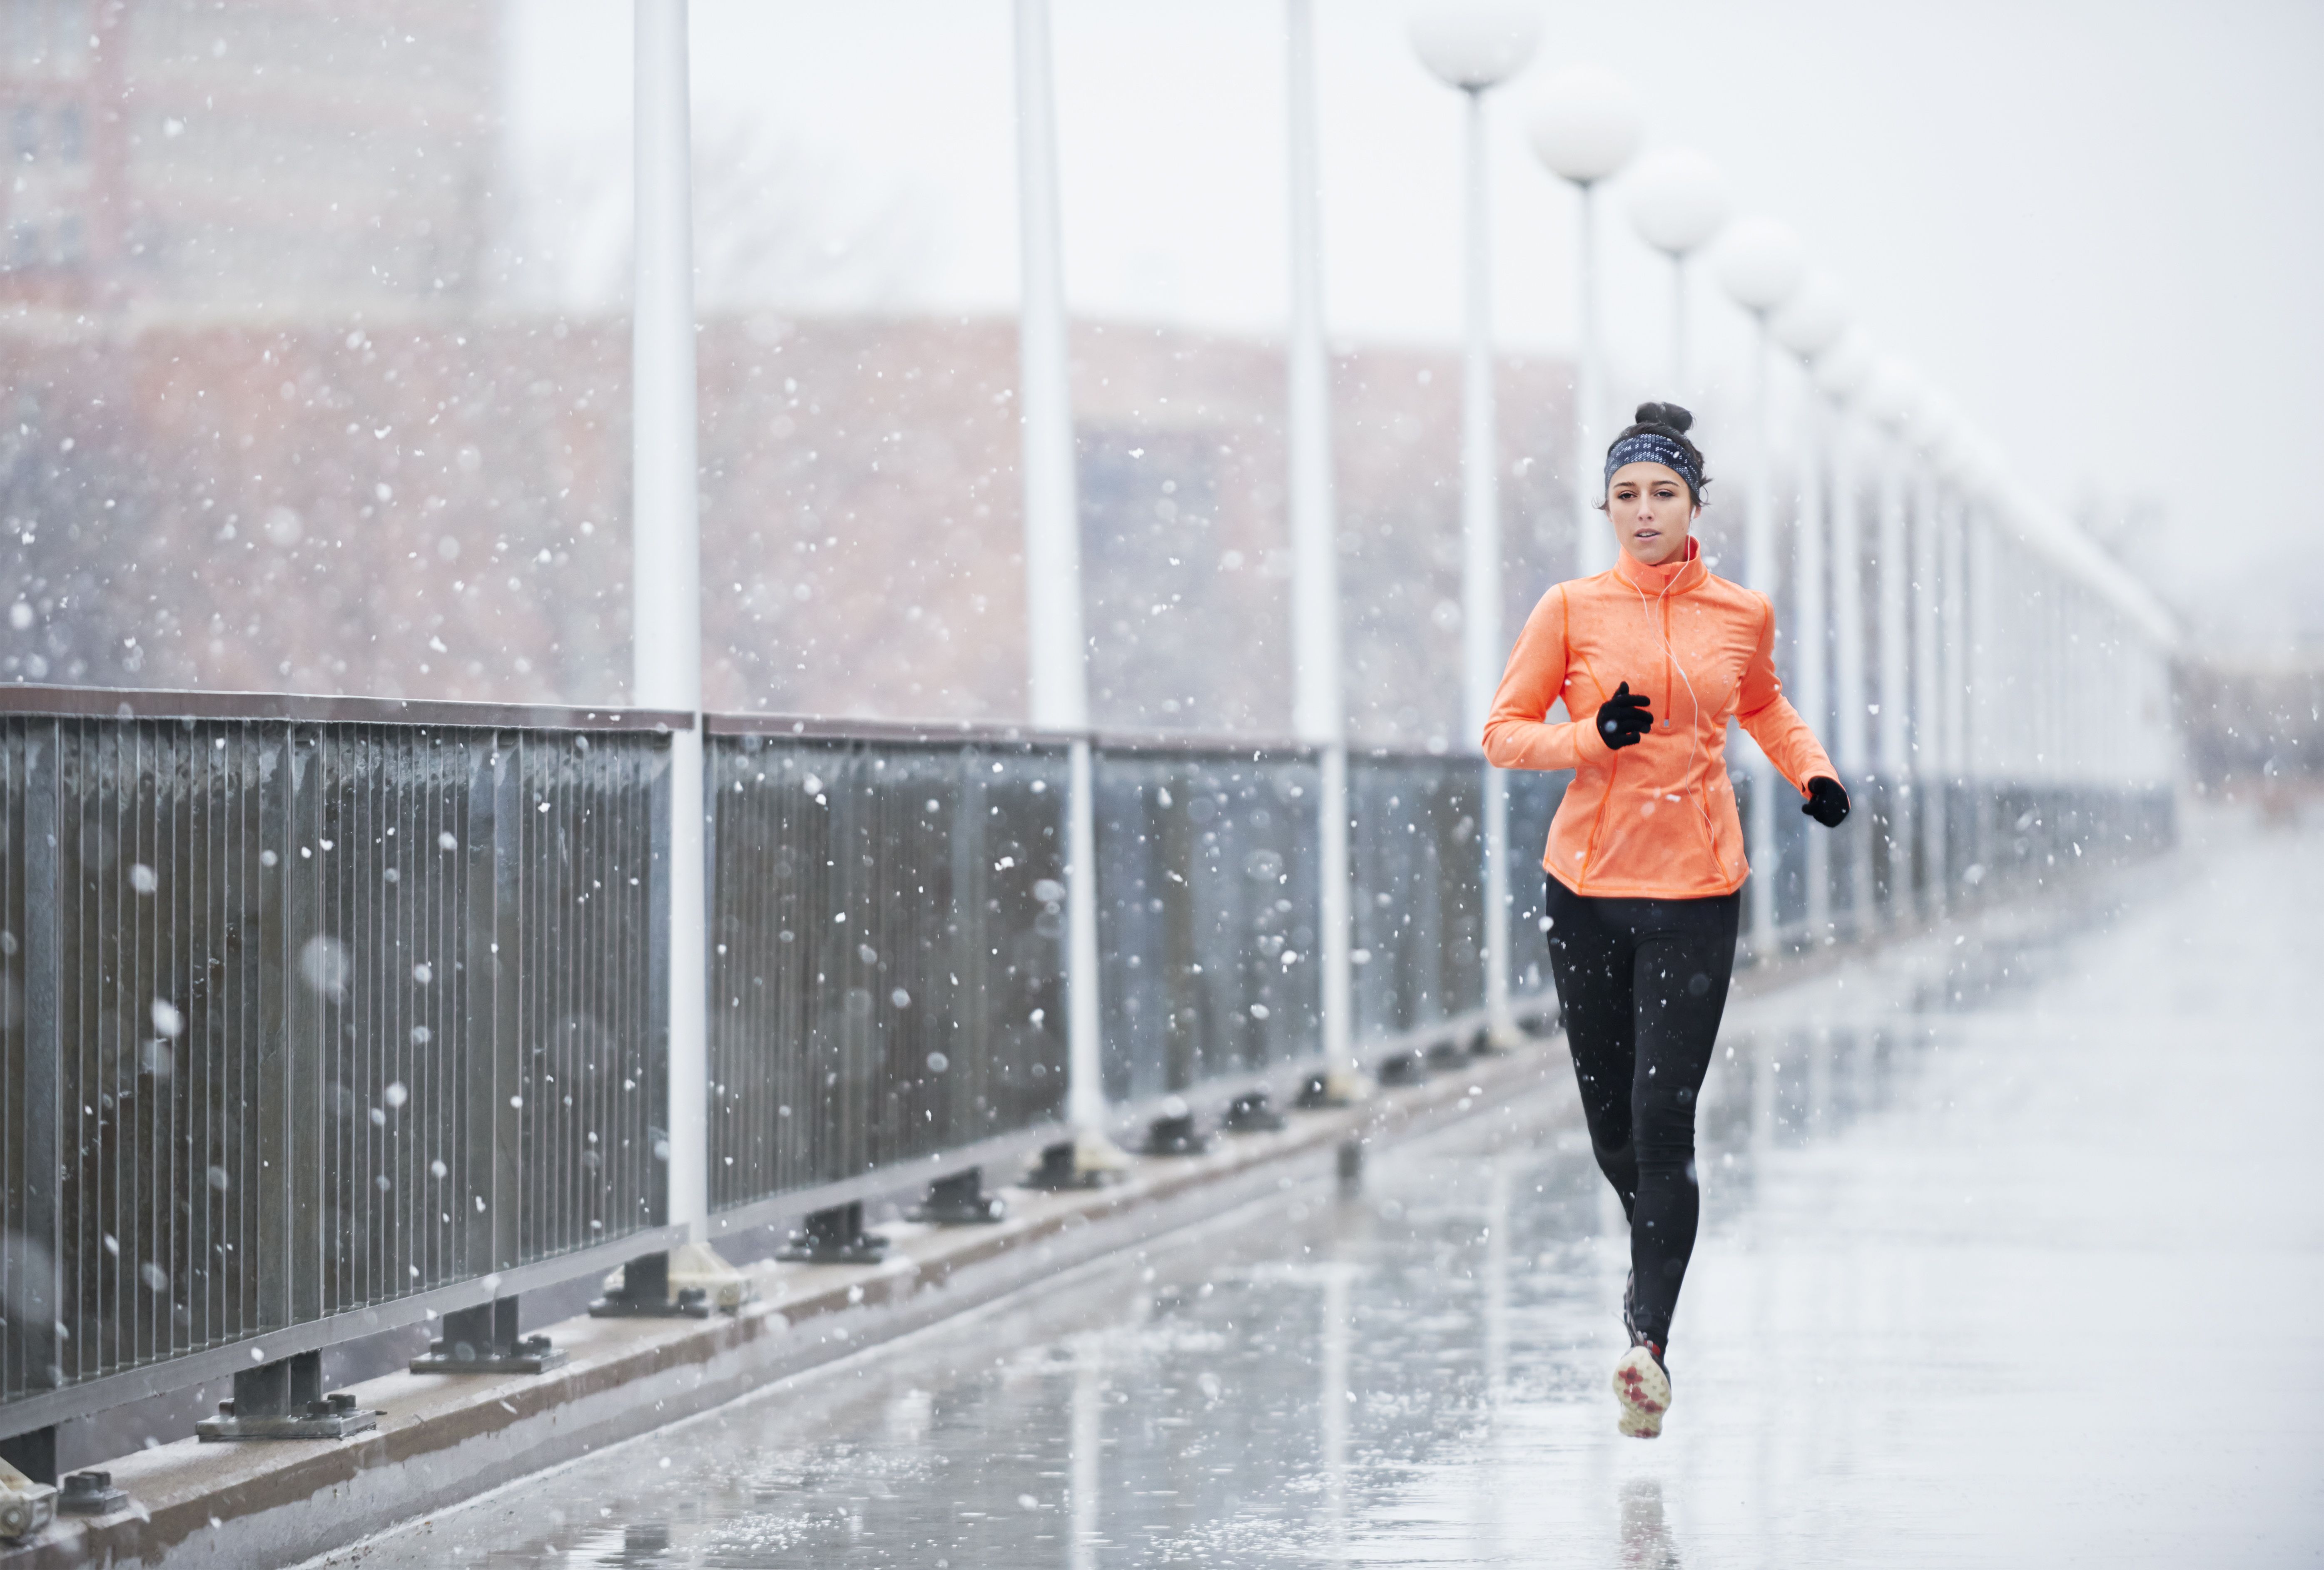 What To Wear Running In Cold Weather Chart